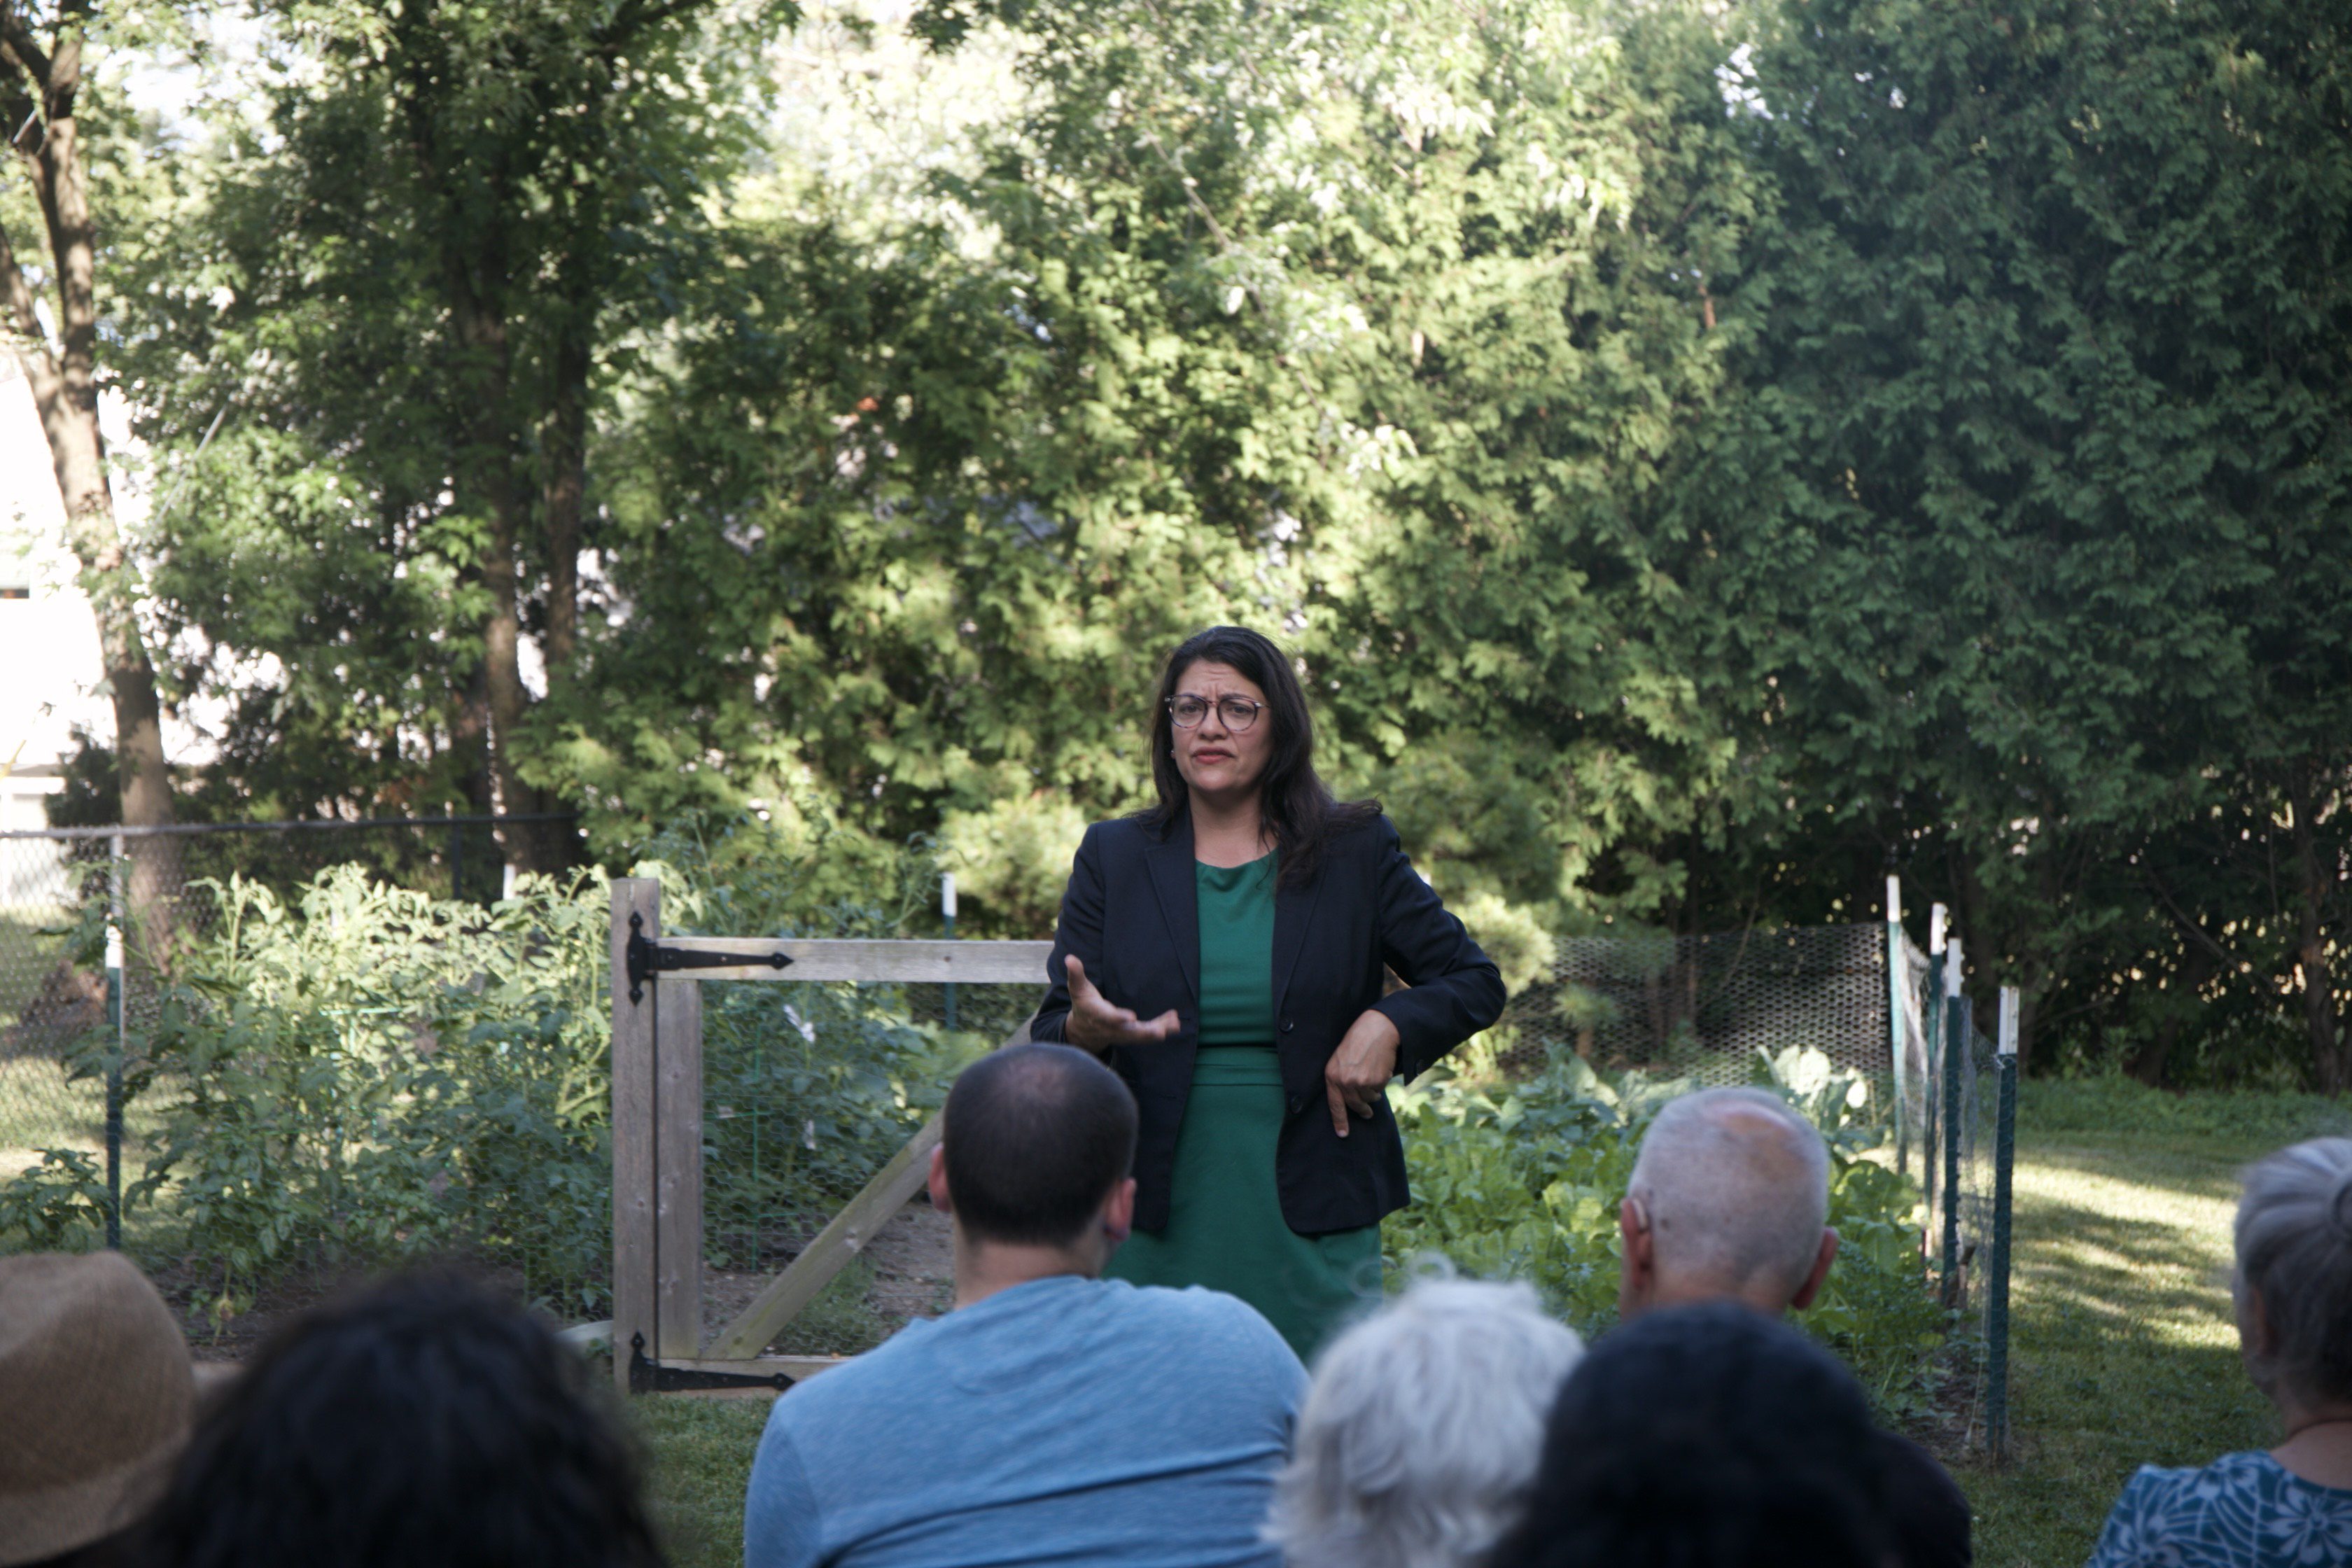 U.S. Rep. Rashida Tlaib (D-Detroit) speaks to residents at a campaign event.